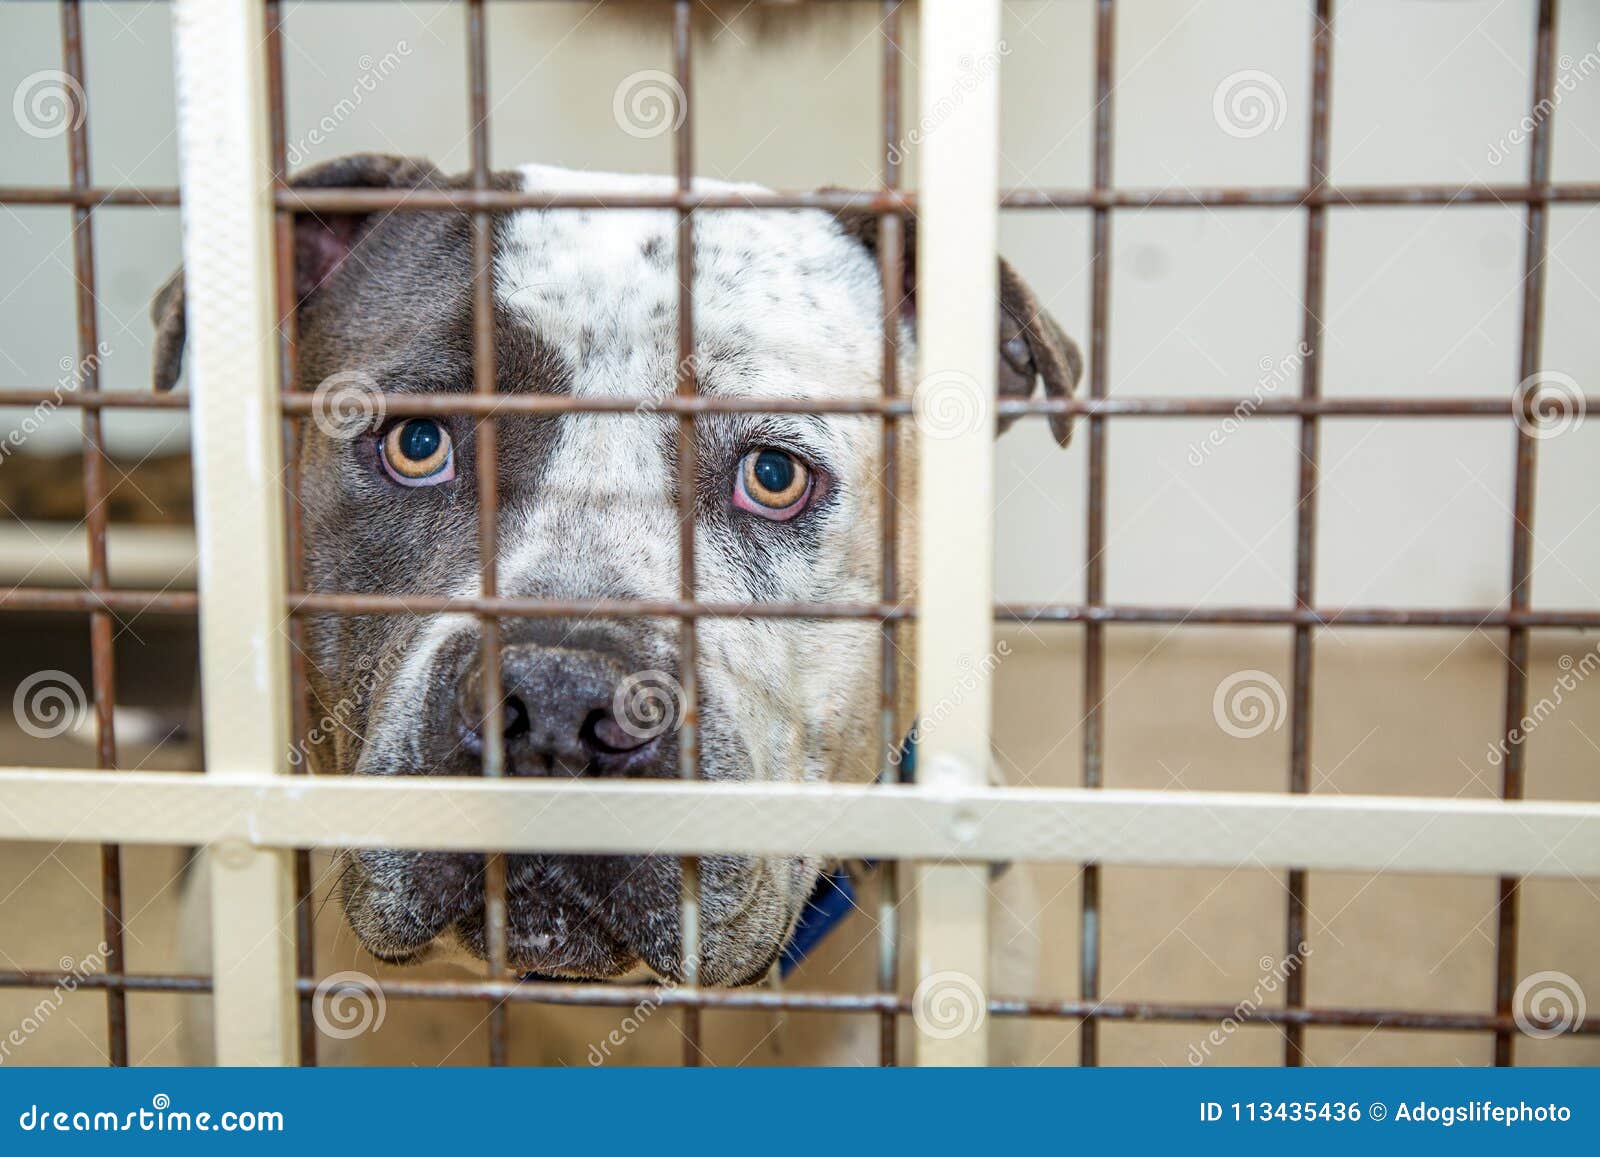 pit bull dog in kennel at shelter